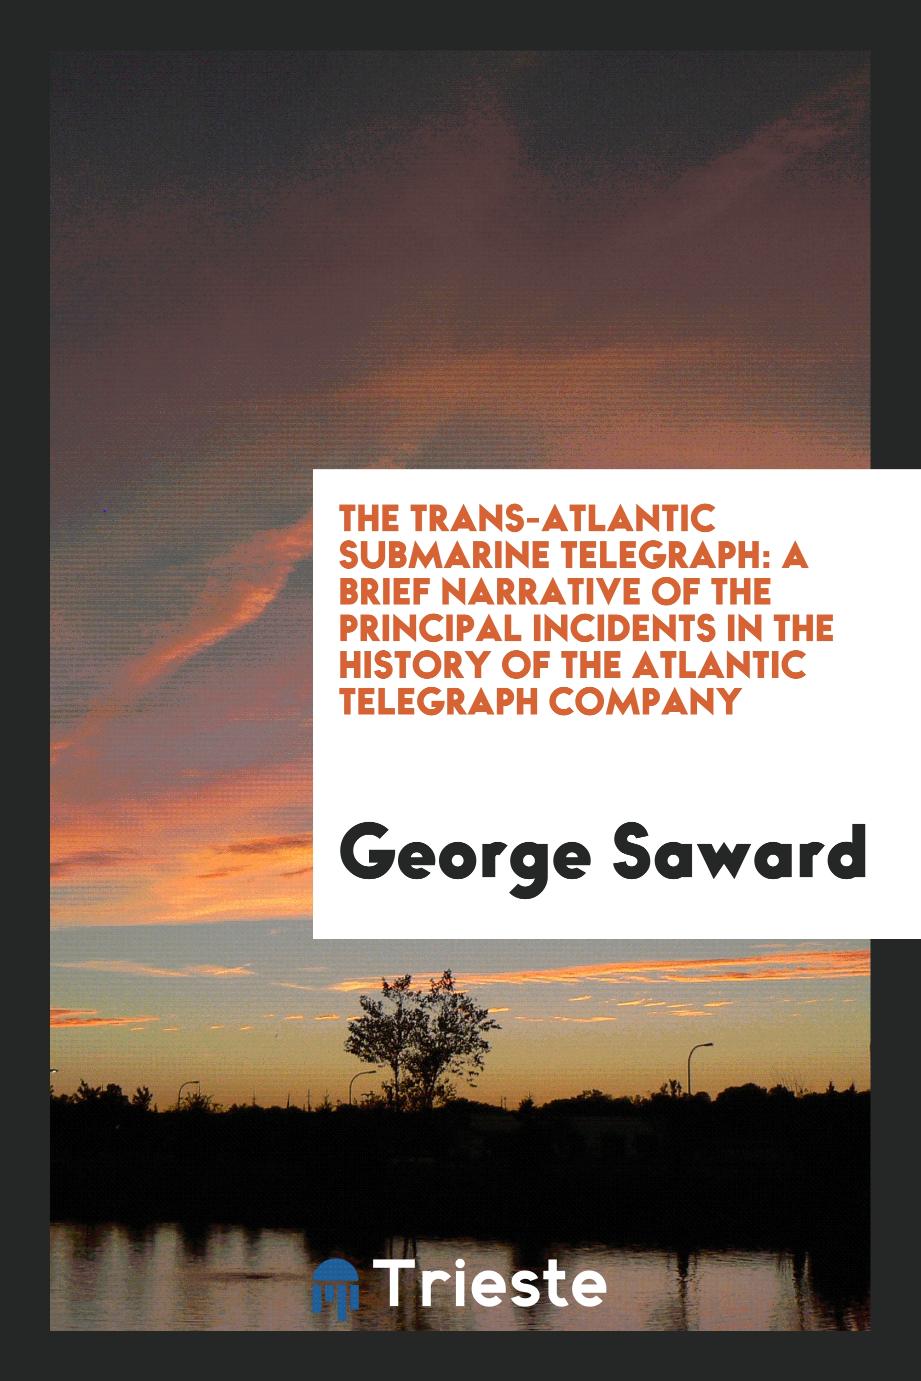 The trans-Atlantic submarine telegraph: a brief narrative of the principal incidents in the history of the Atlantic Telegraph Company